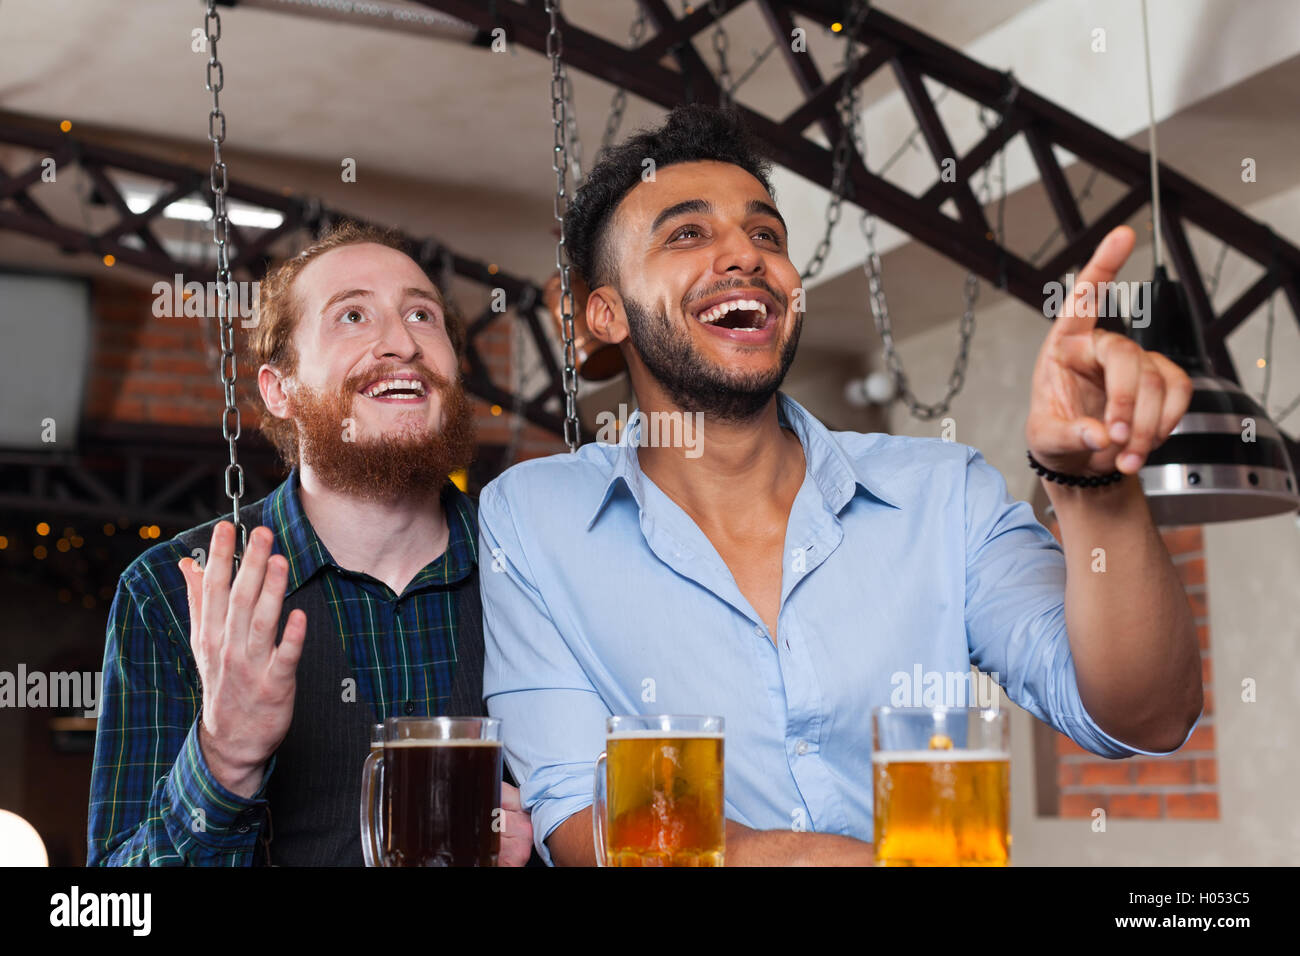 Two Man In Bar Watching Football, Drinking Beer Standing At Counter Point Finger, Mix Race Cheerful Friends Stock Photo